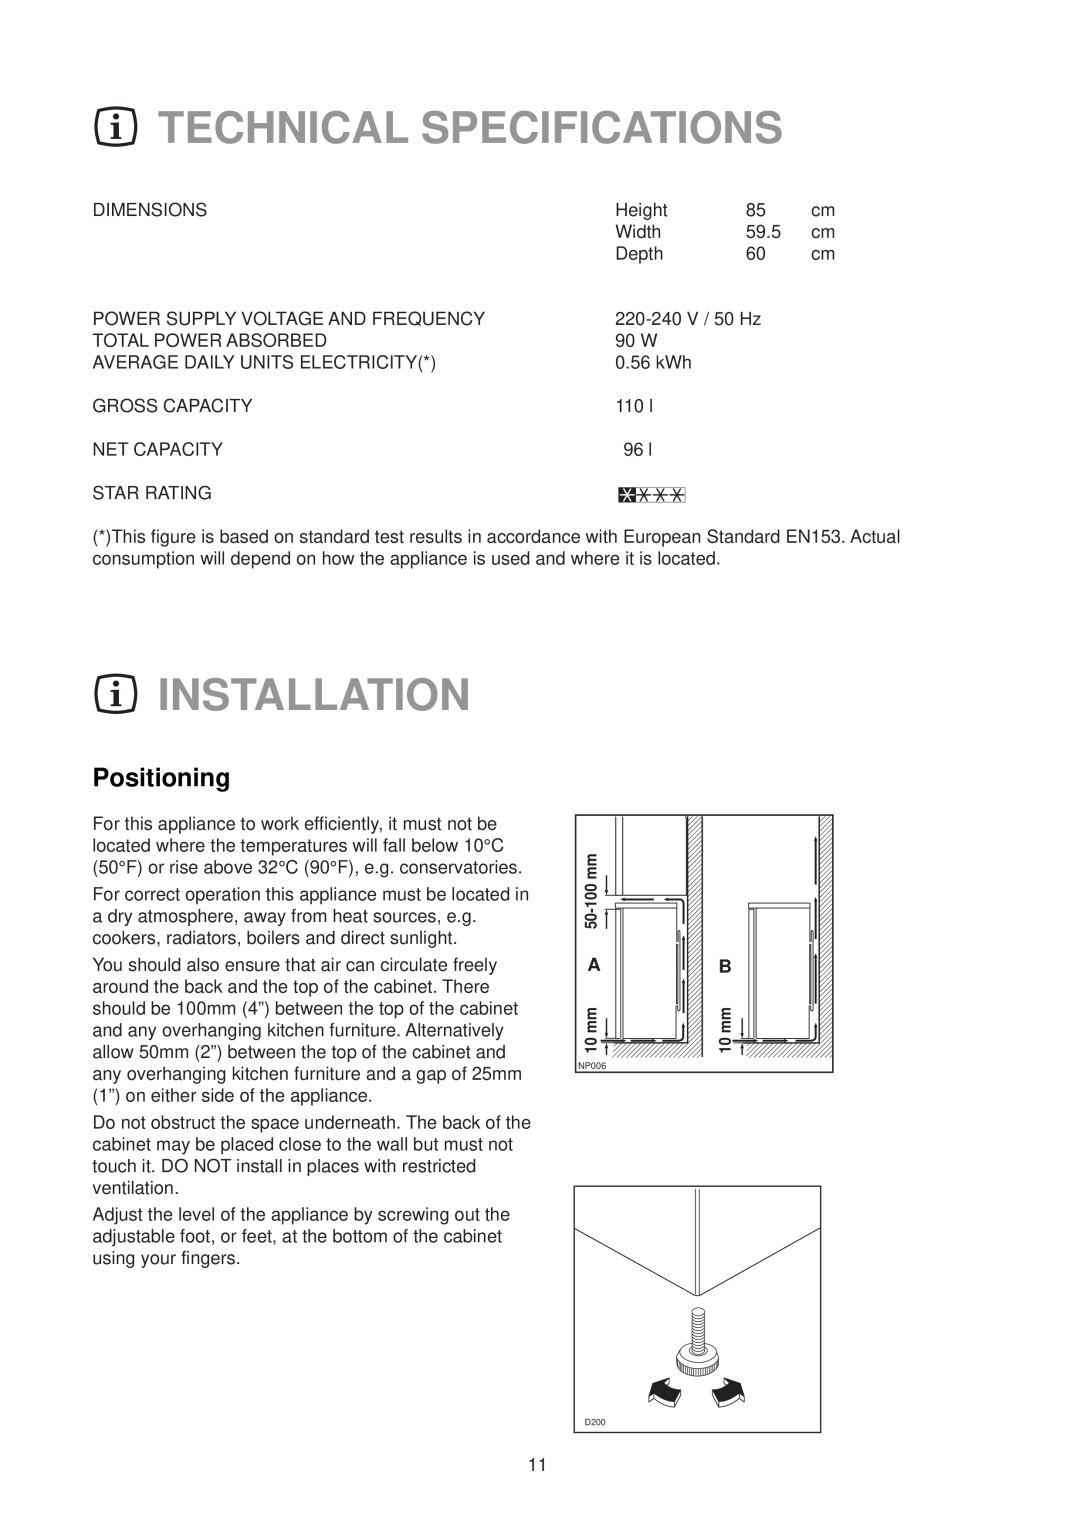 Electrolux EU 1327T manual Technical Specifications, Installation, Positioning 